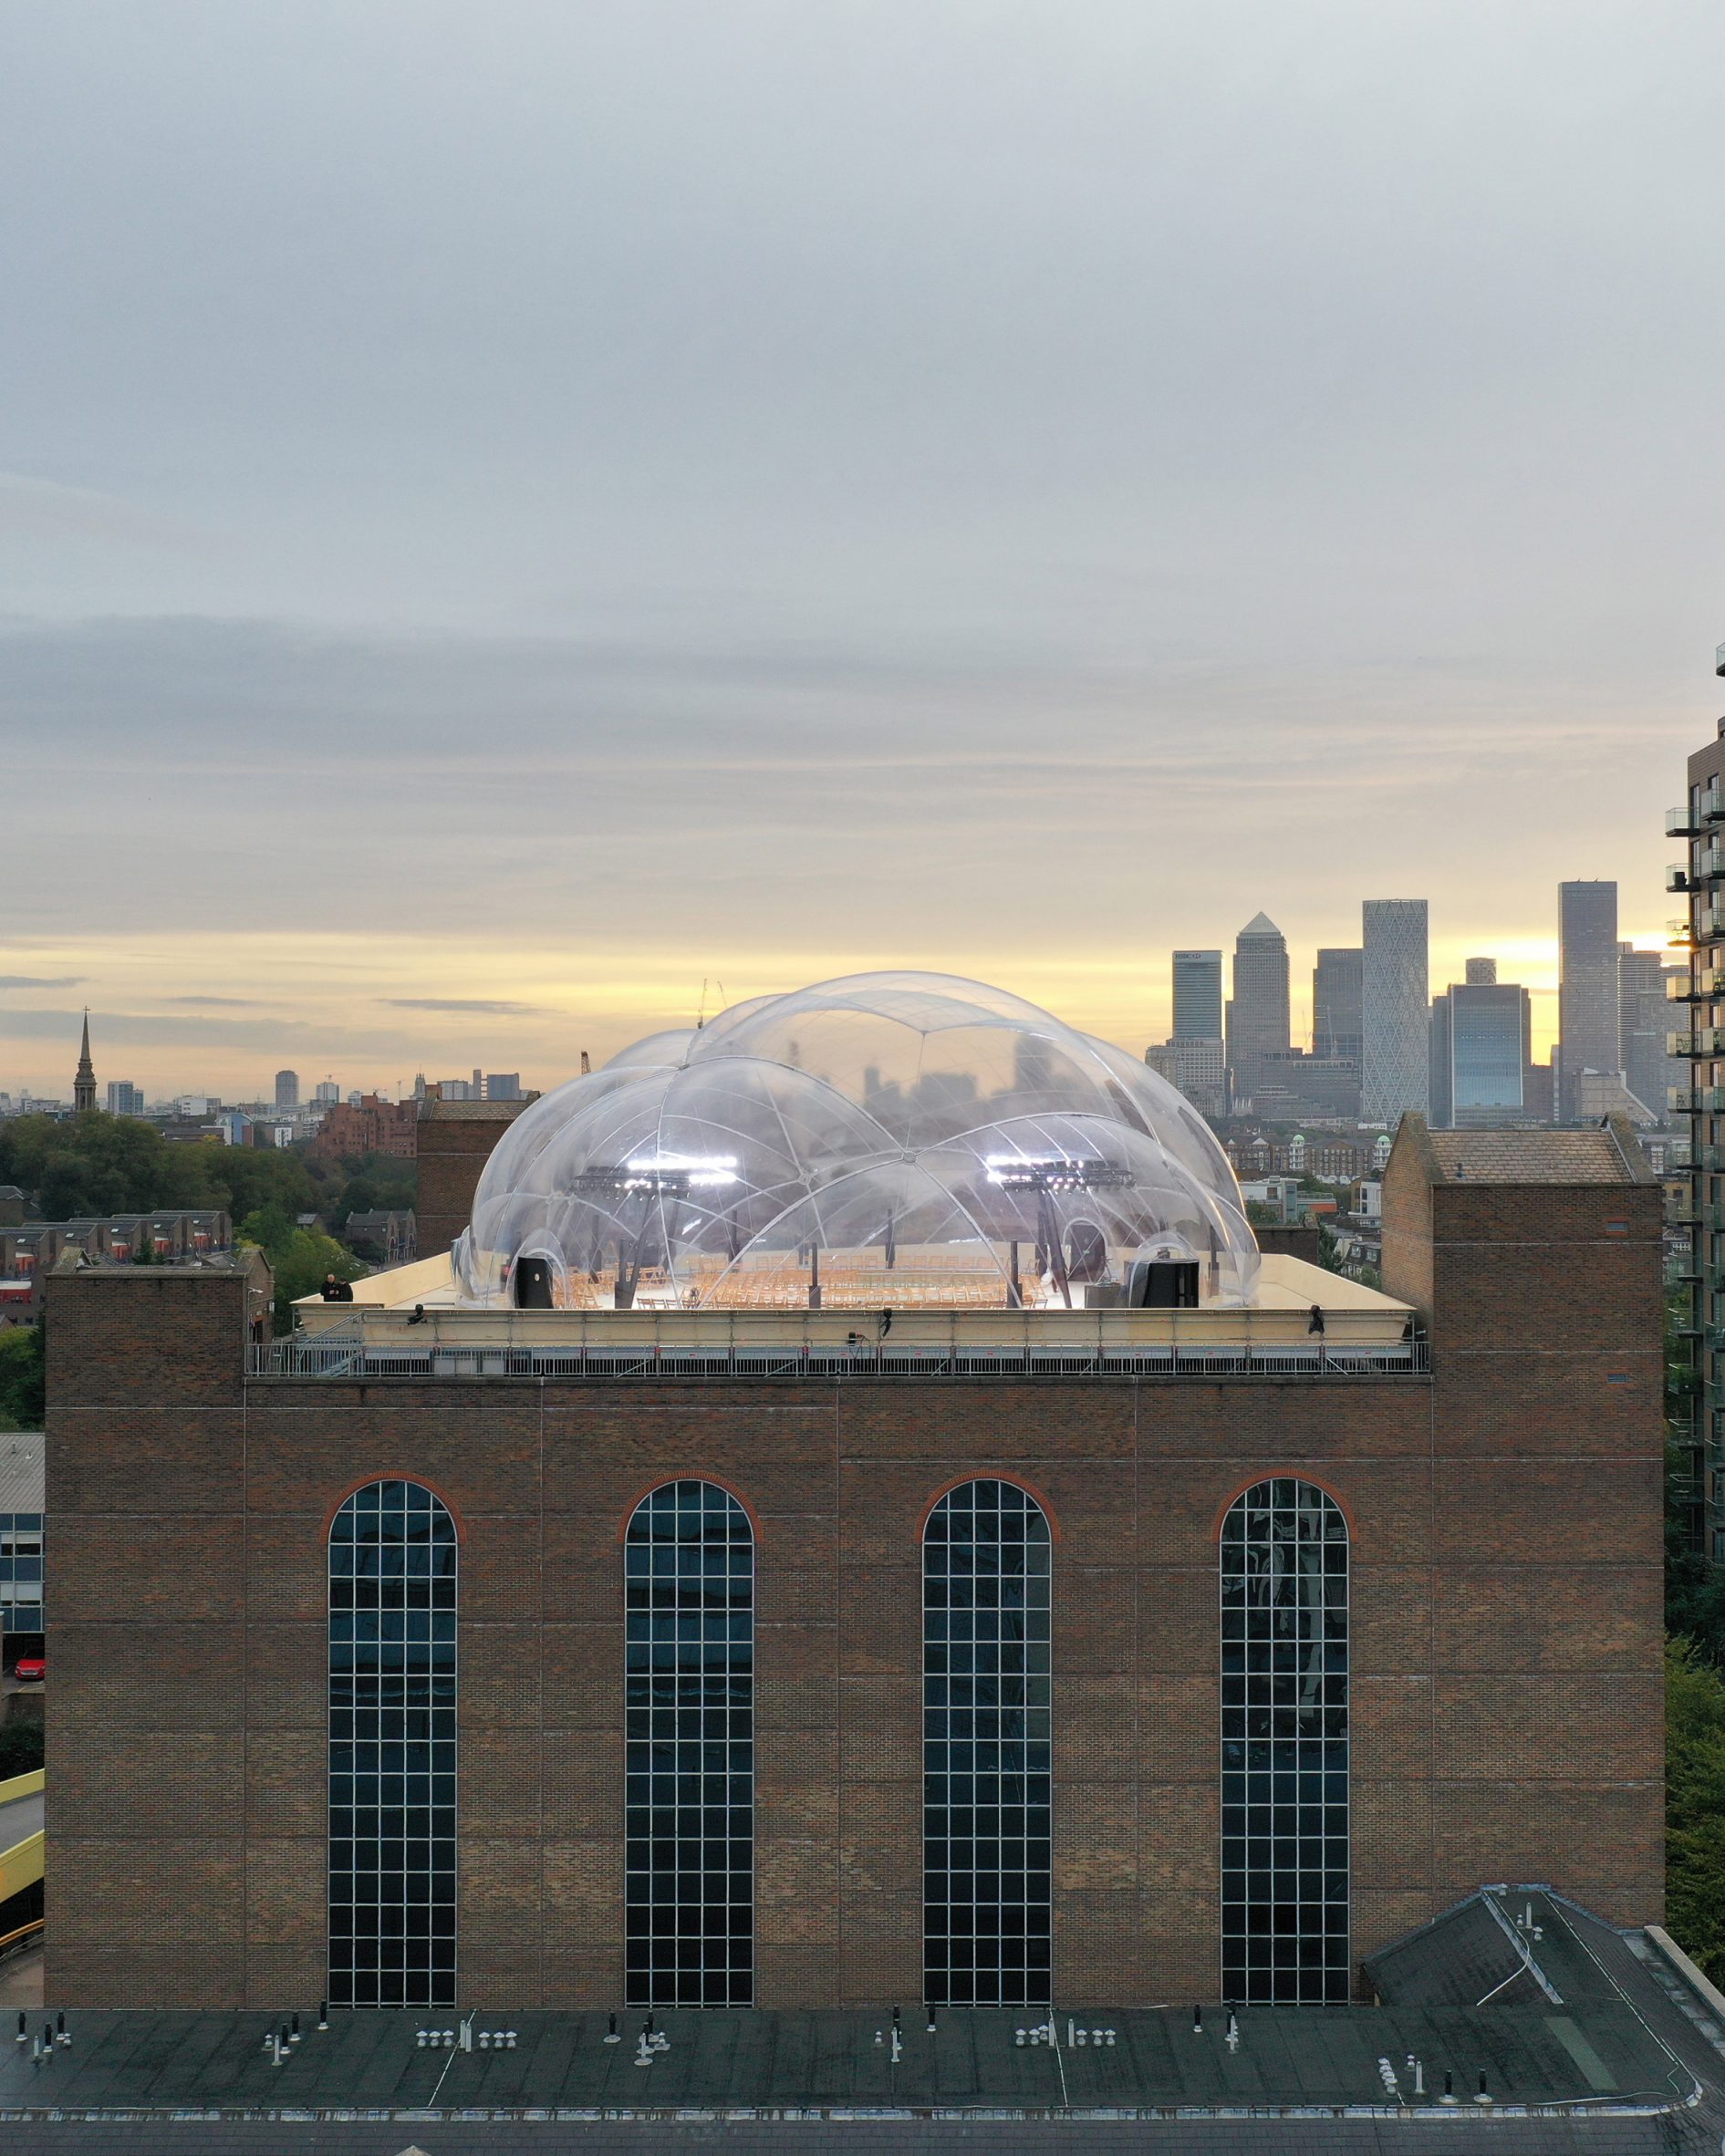 The alexander mcqueen show was built on top of a carpark 